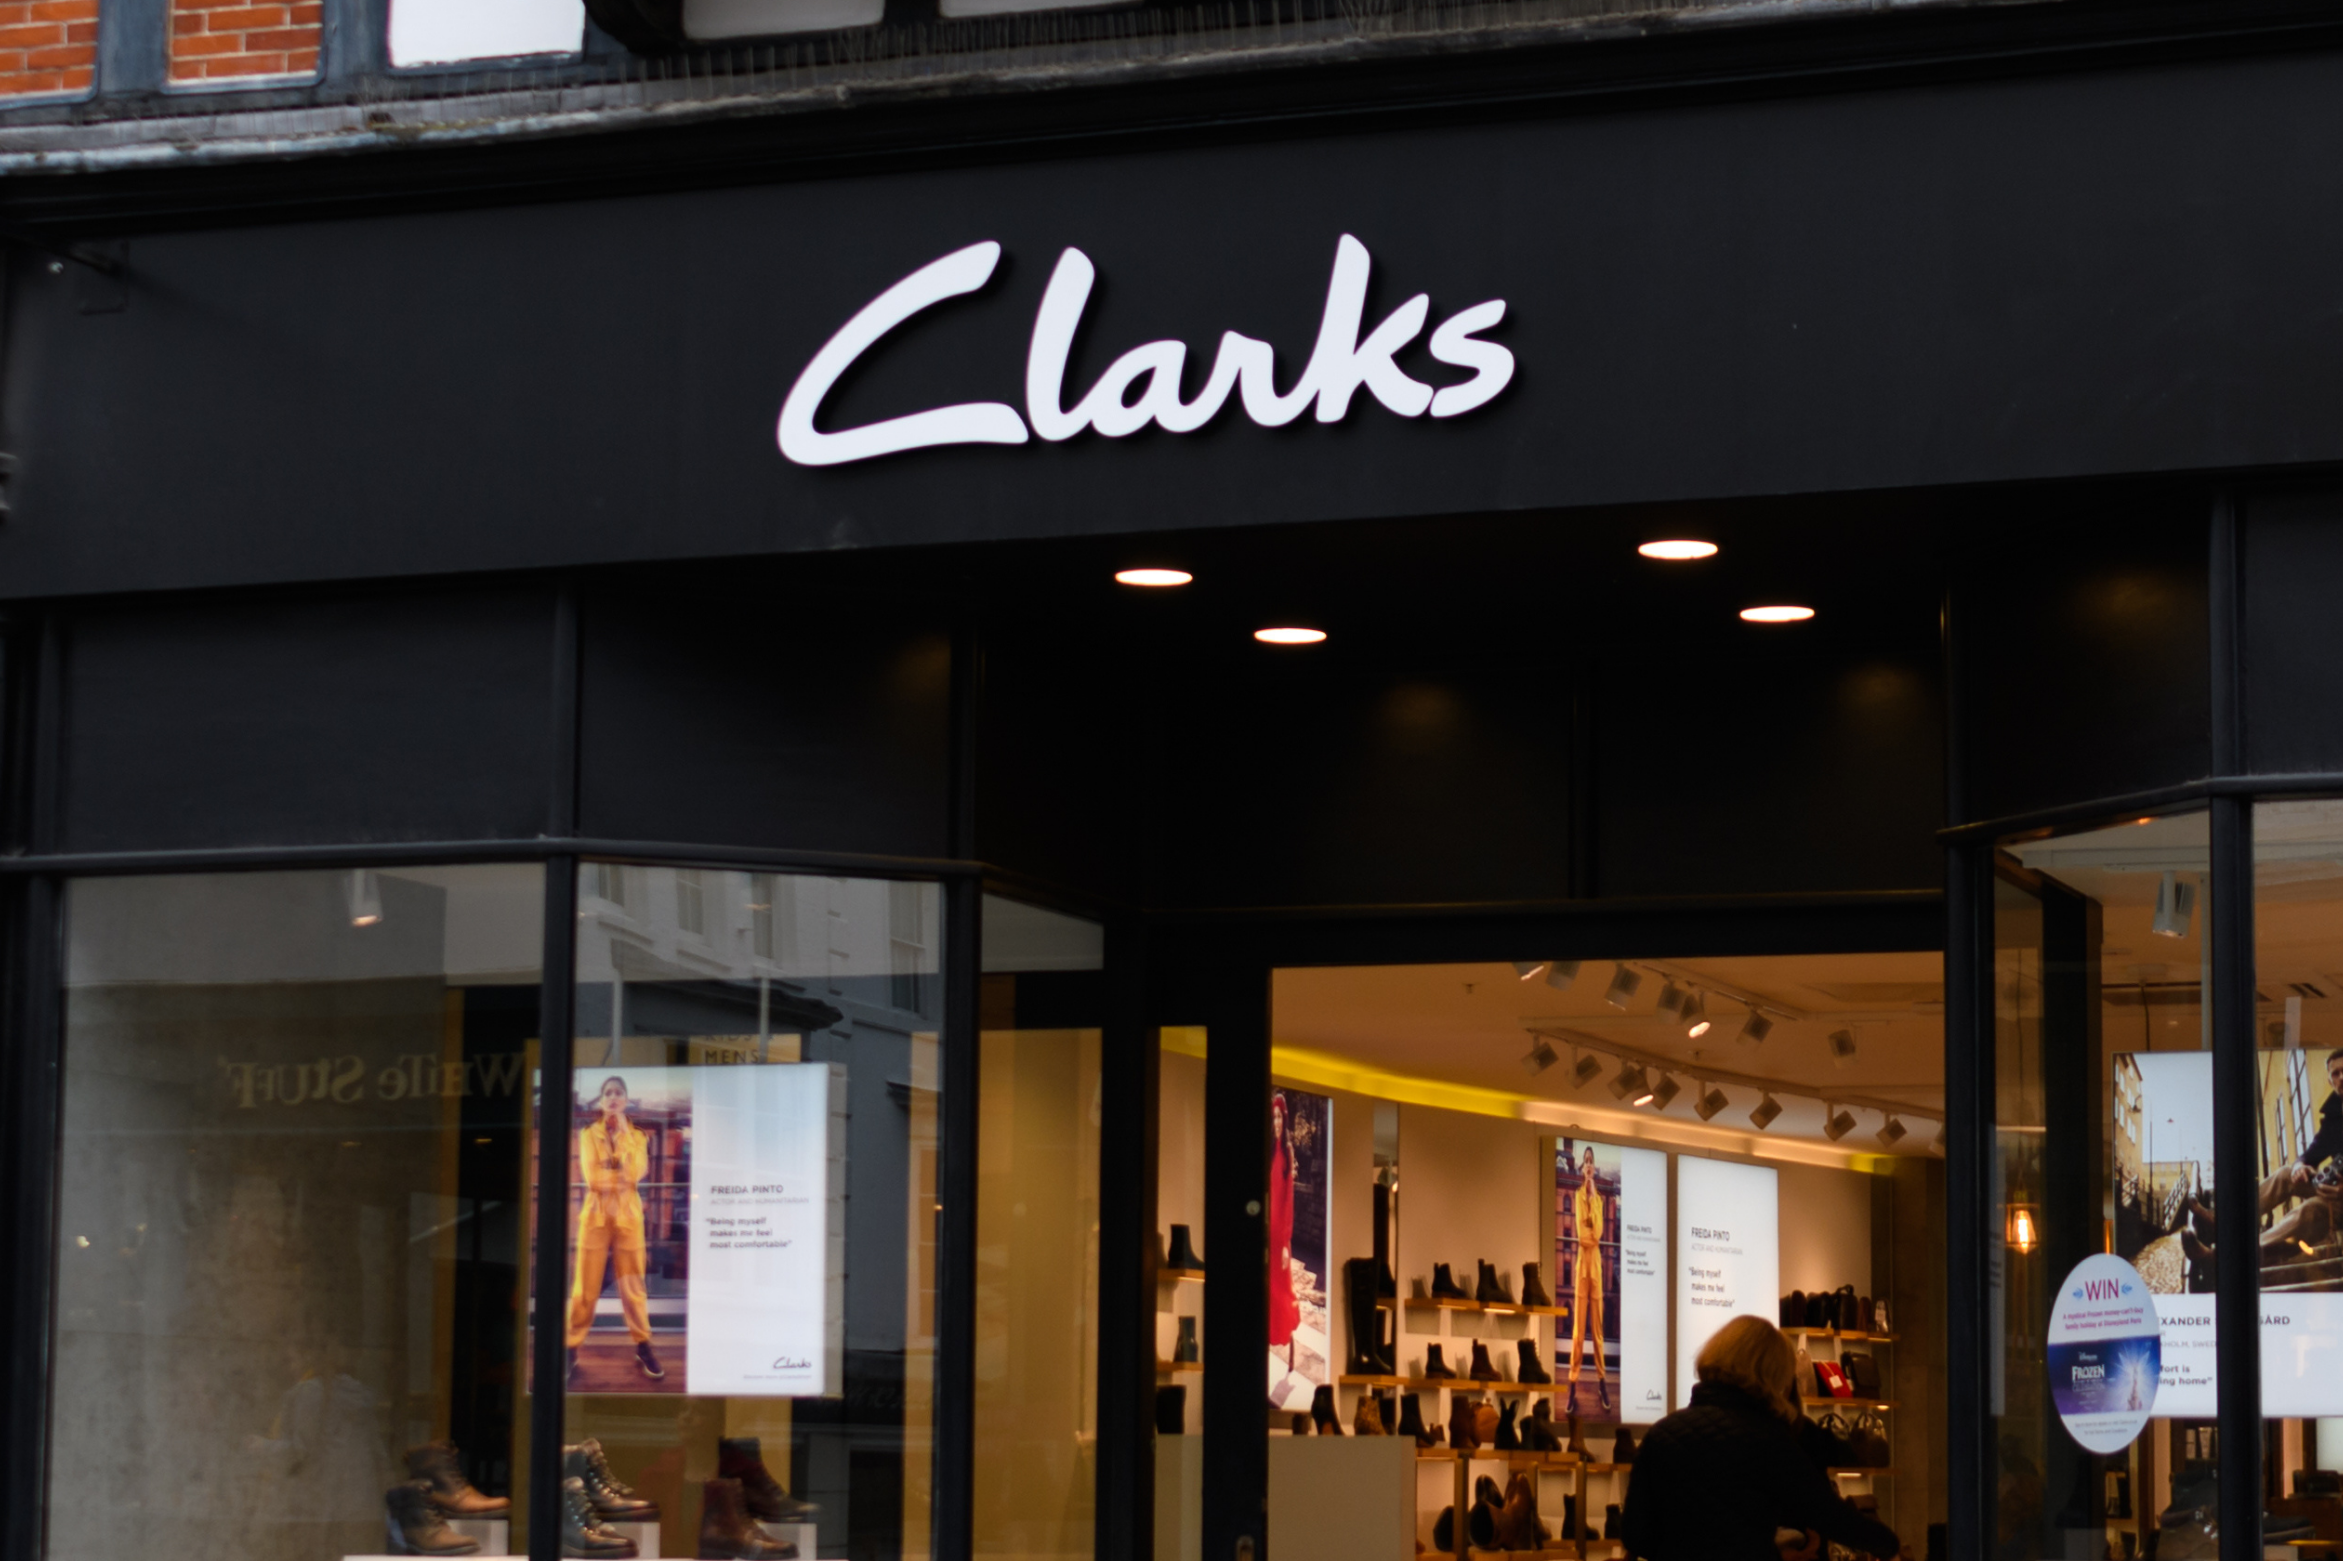 clarks shoes return policy in store